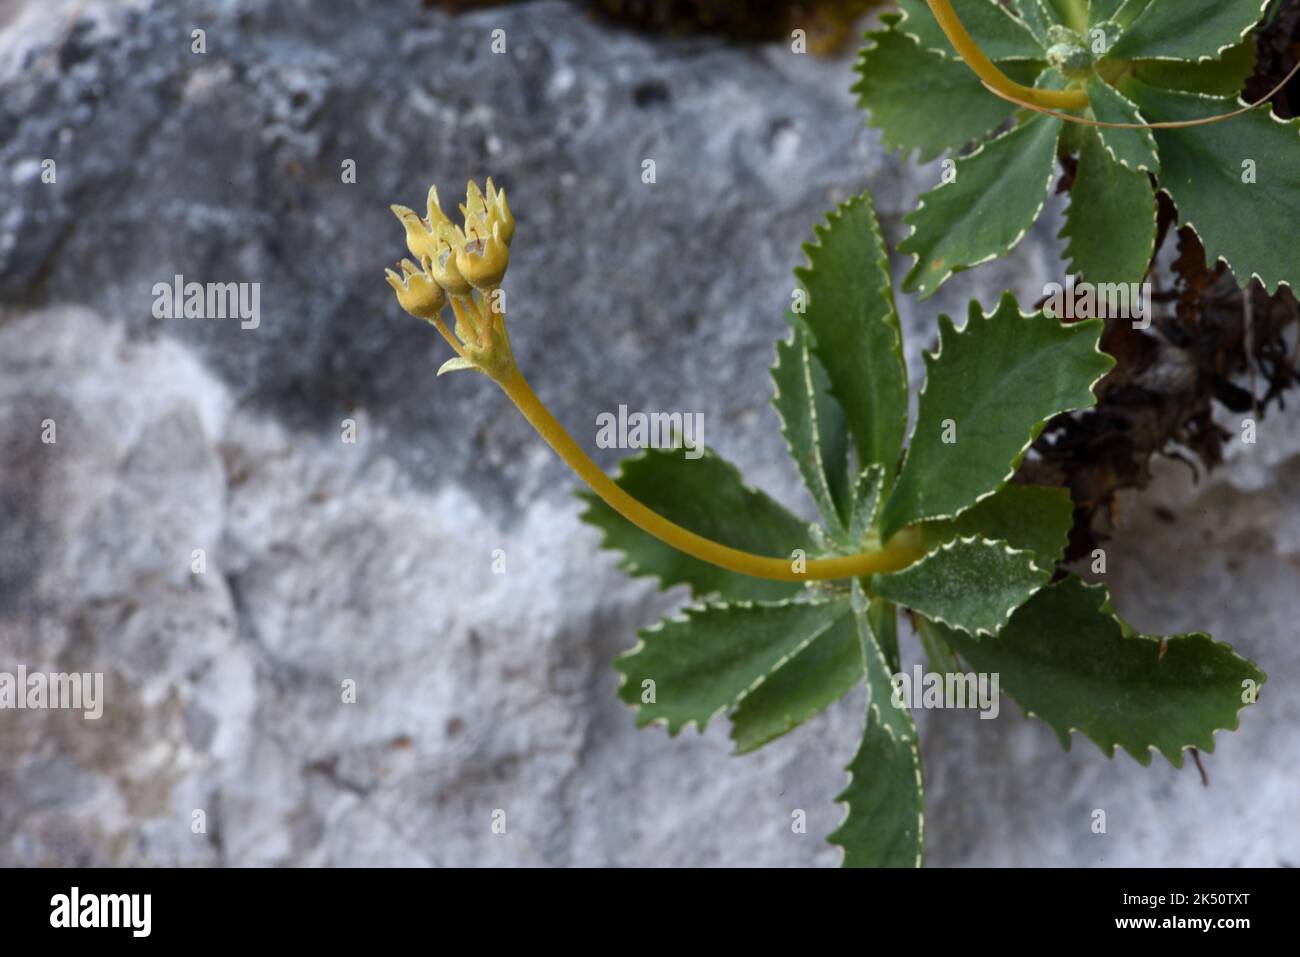 Flowering Alpine Lady's Mantle, Alchemilla alpina, Growing on Cliff or Rocky Outcrop in the Verdon Gorge Alpes-de-Haute-Provence Provence France Stock Photo